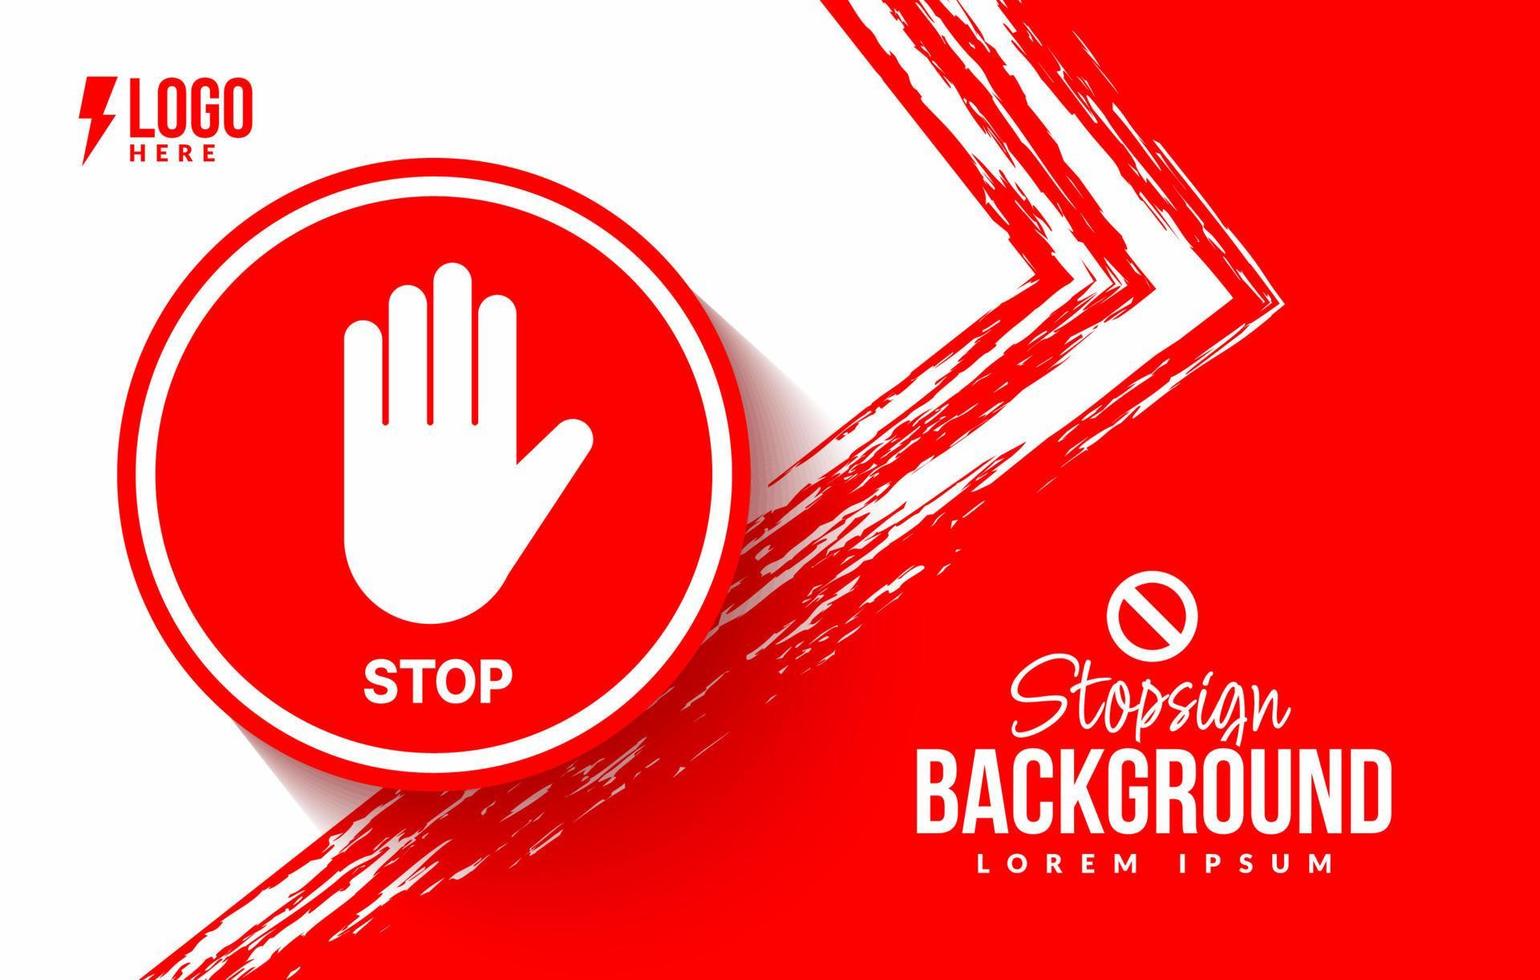 Stop sign isolated on red background, Simple stop banner design template vector